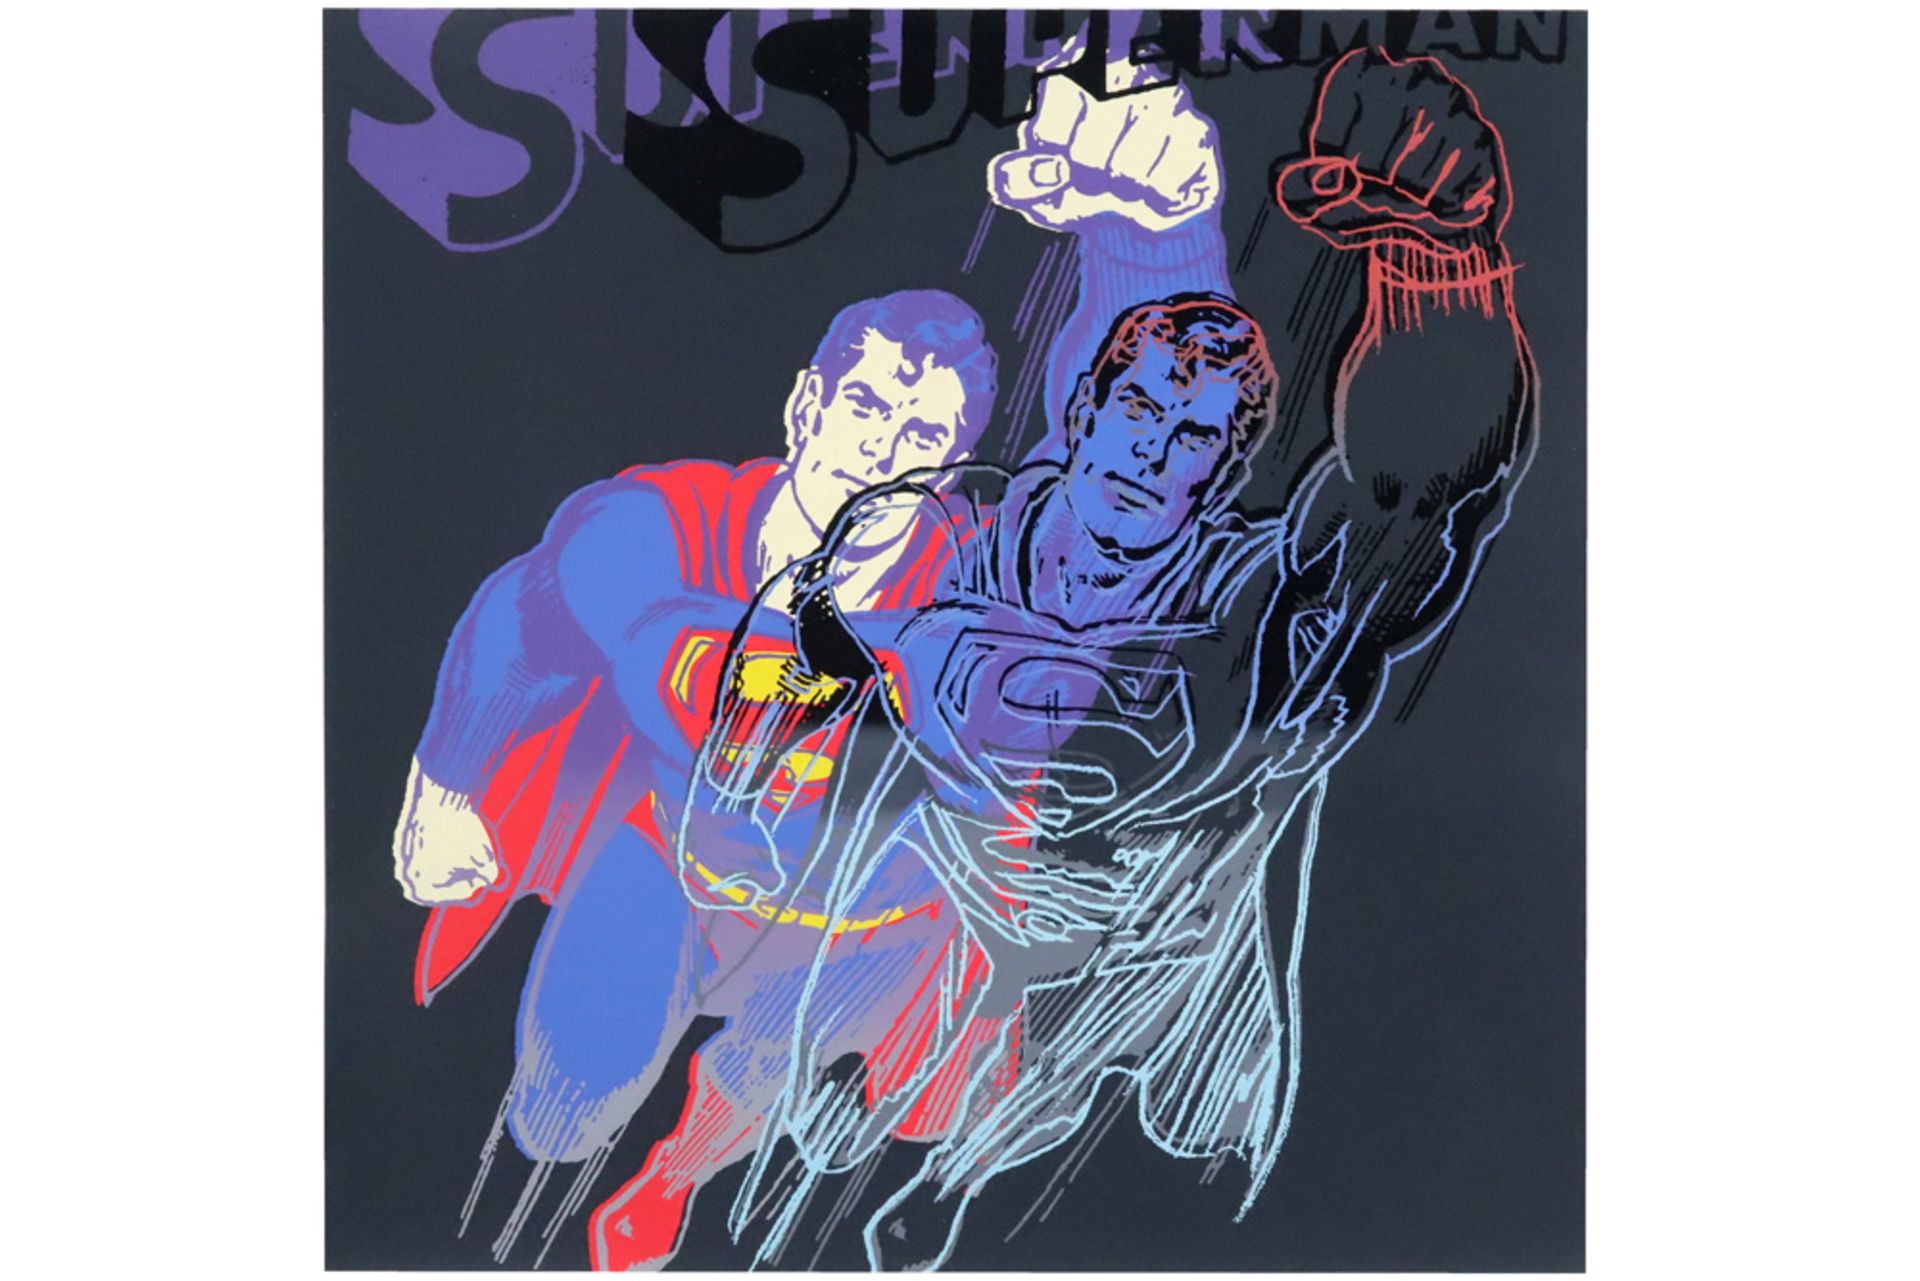 Andy Warhol "Superman" screenprint with diamond dust on Lennox Museumboard from the series "Myths"